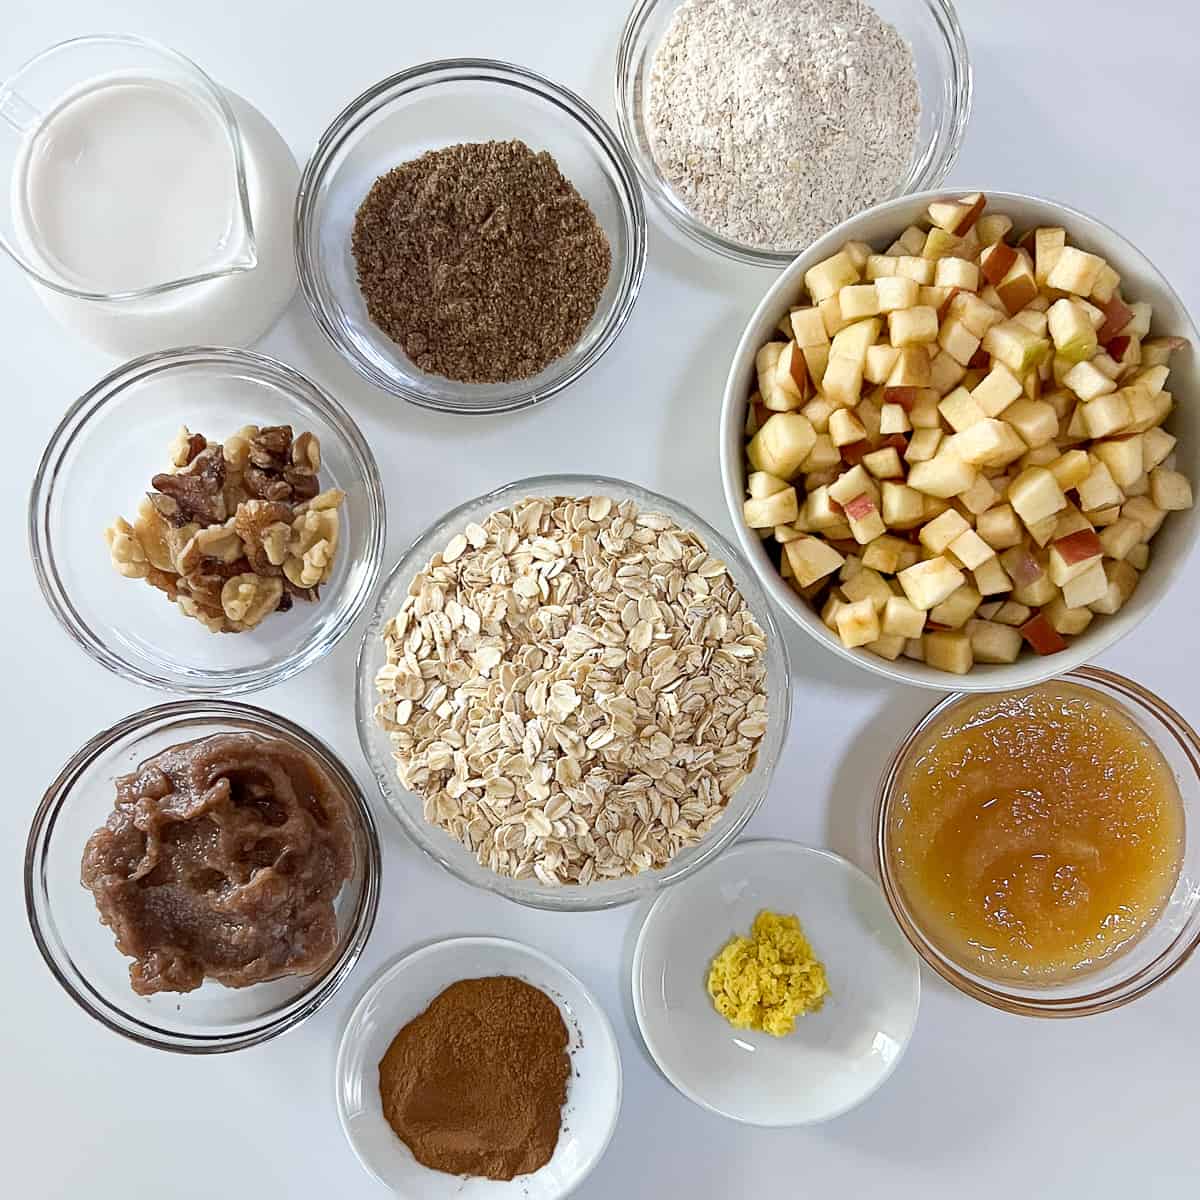 top view of ingredients for apple cinnamon muffins: diced apples, rolled oats, ground flaxseeds, apple sauce, walnuts, plant based milk, date syrup, grated ginger root, apple sauce and cinnamon